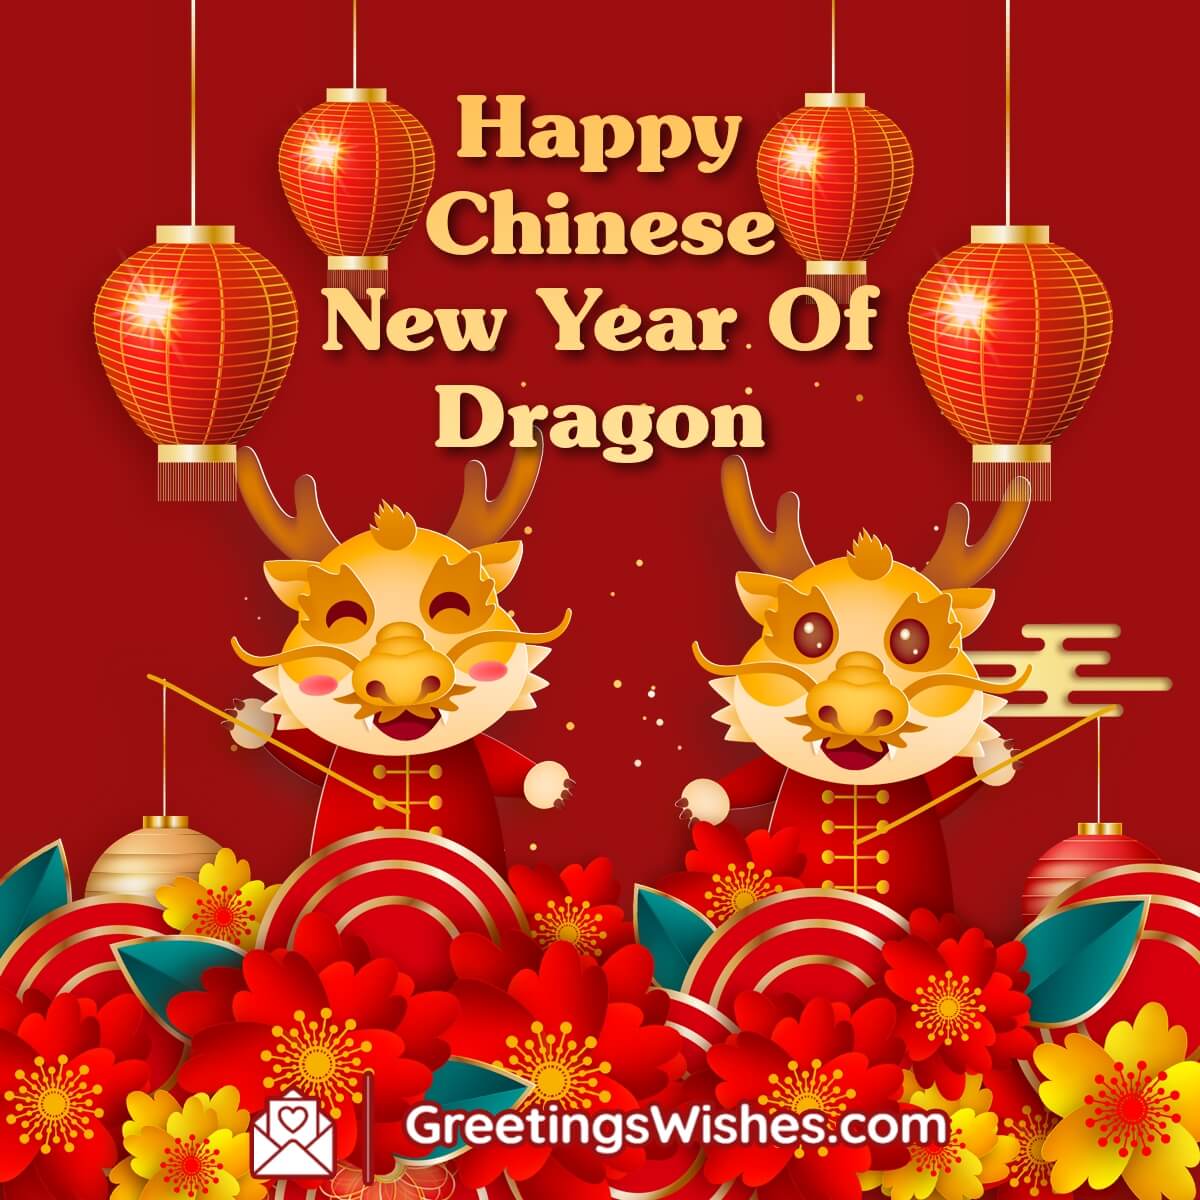 Happy Chinese New Year Of Dragon